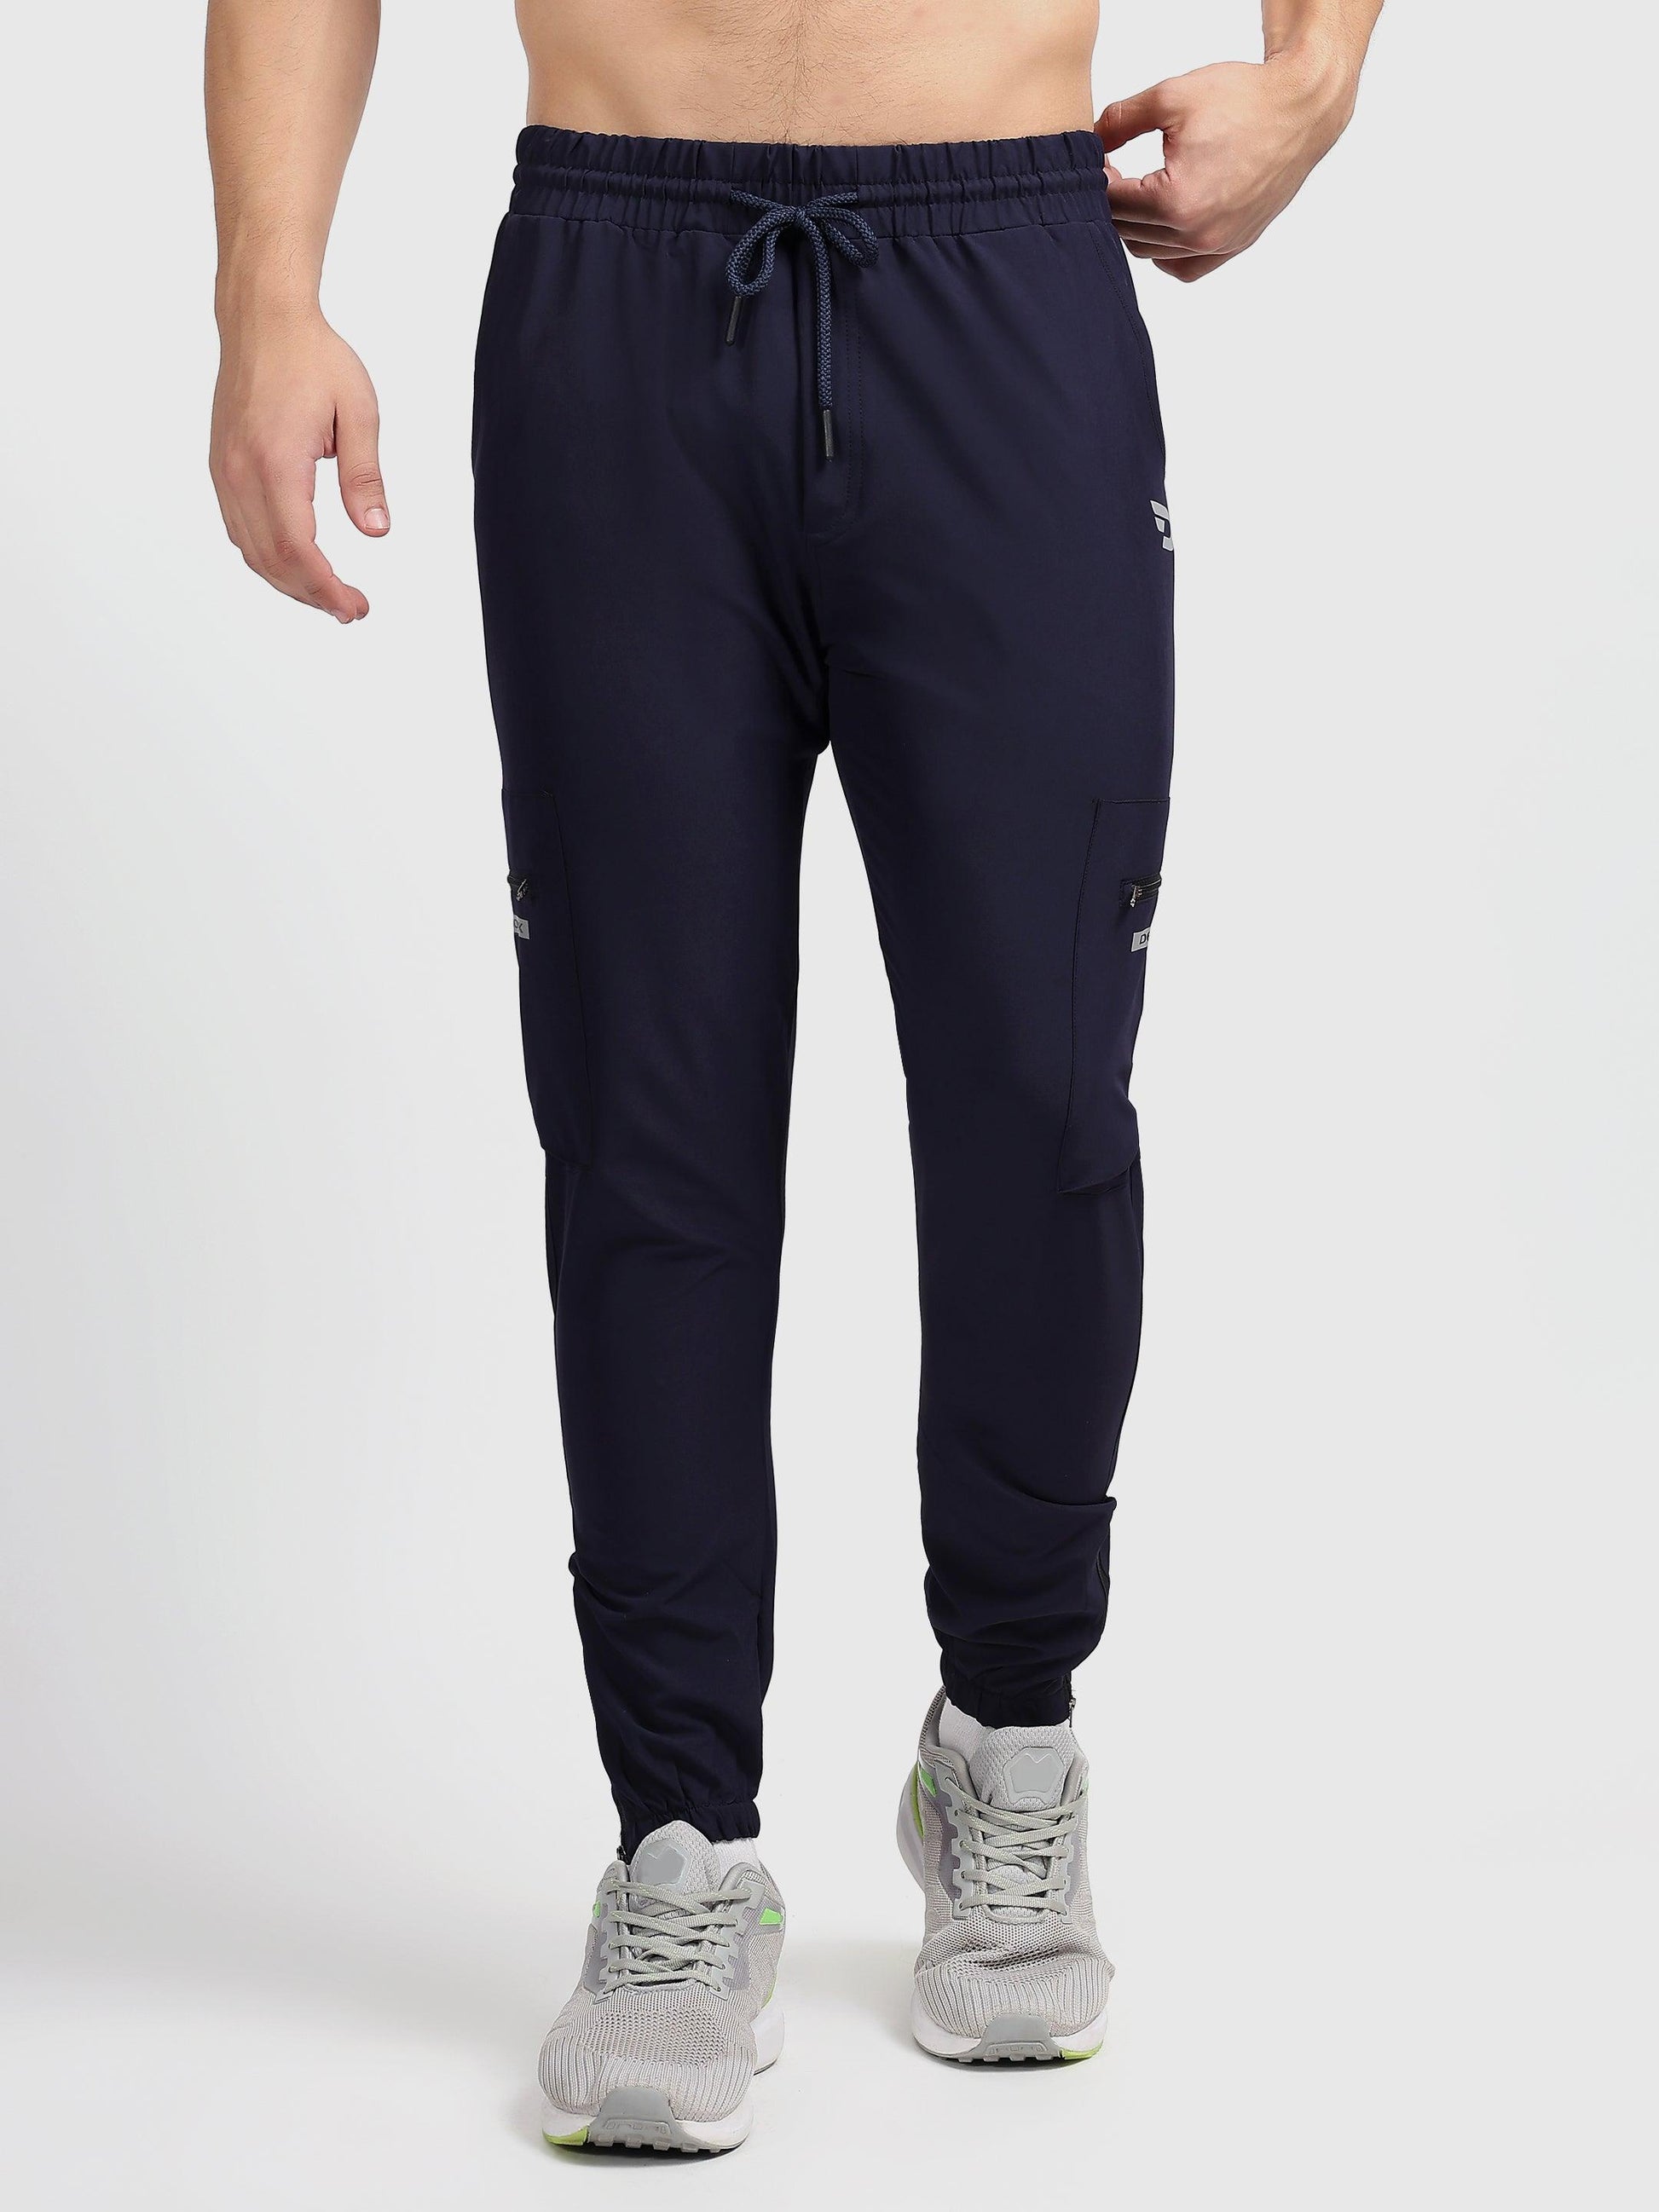 Denmonk: Elevate your look with these Trekcrago sharp midnight navy Trackpant for mens.